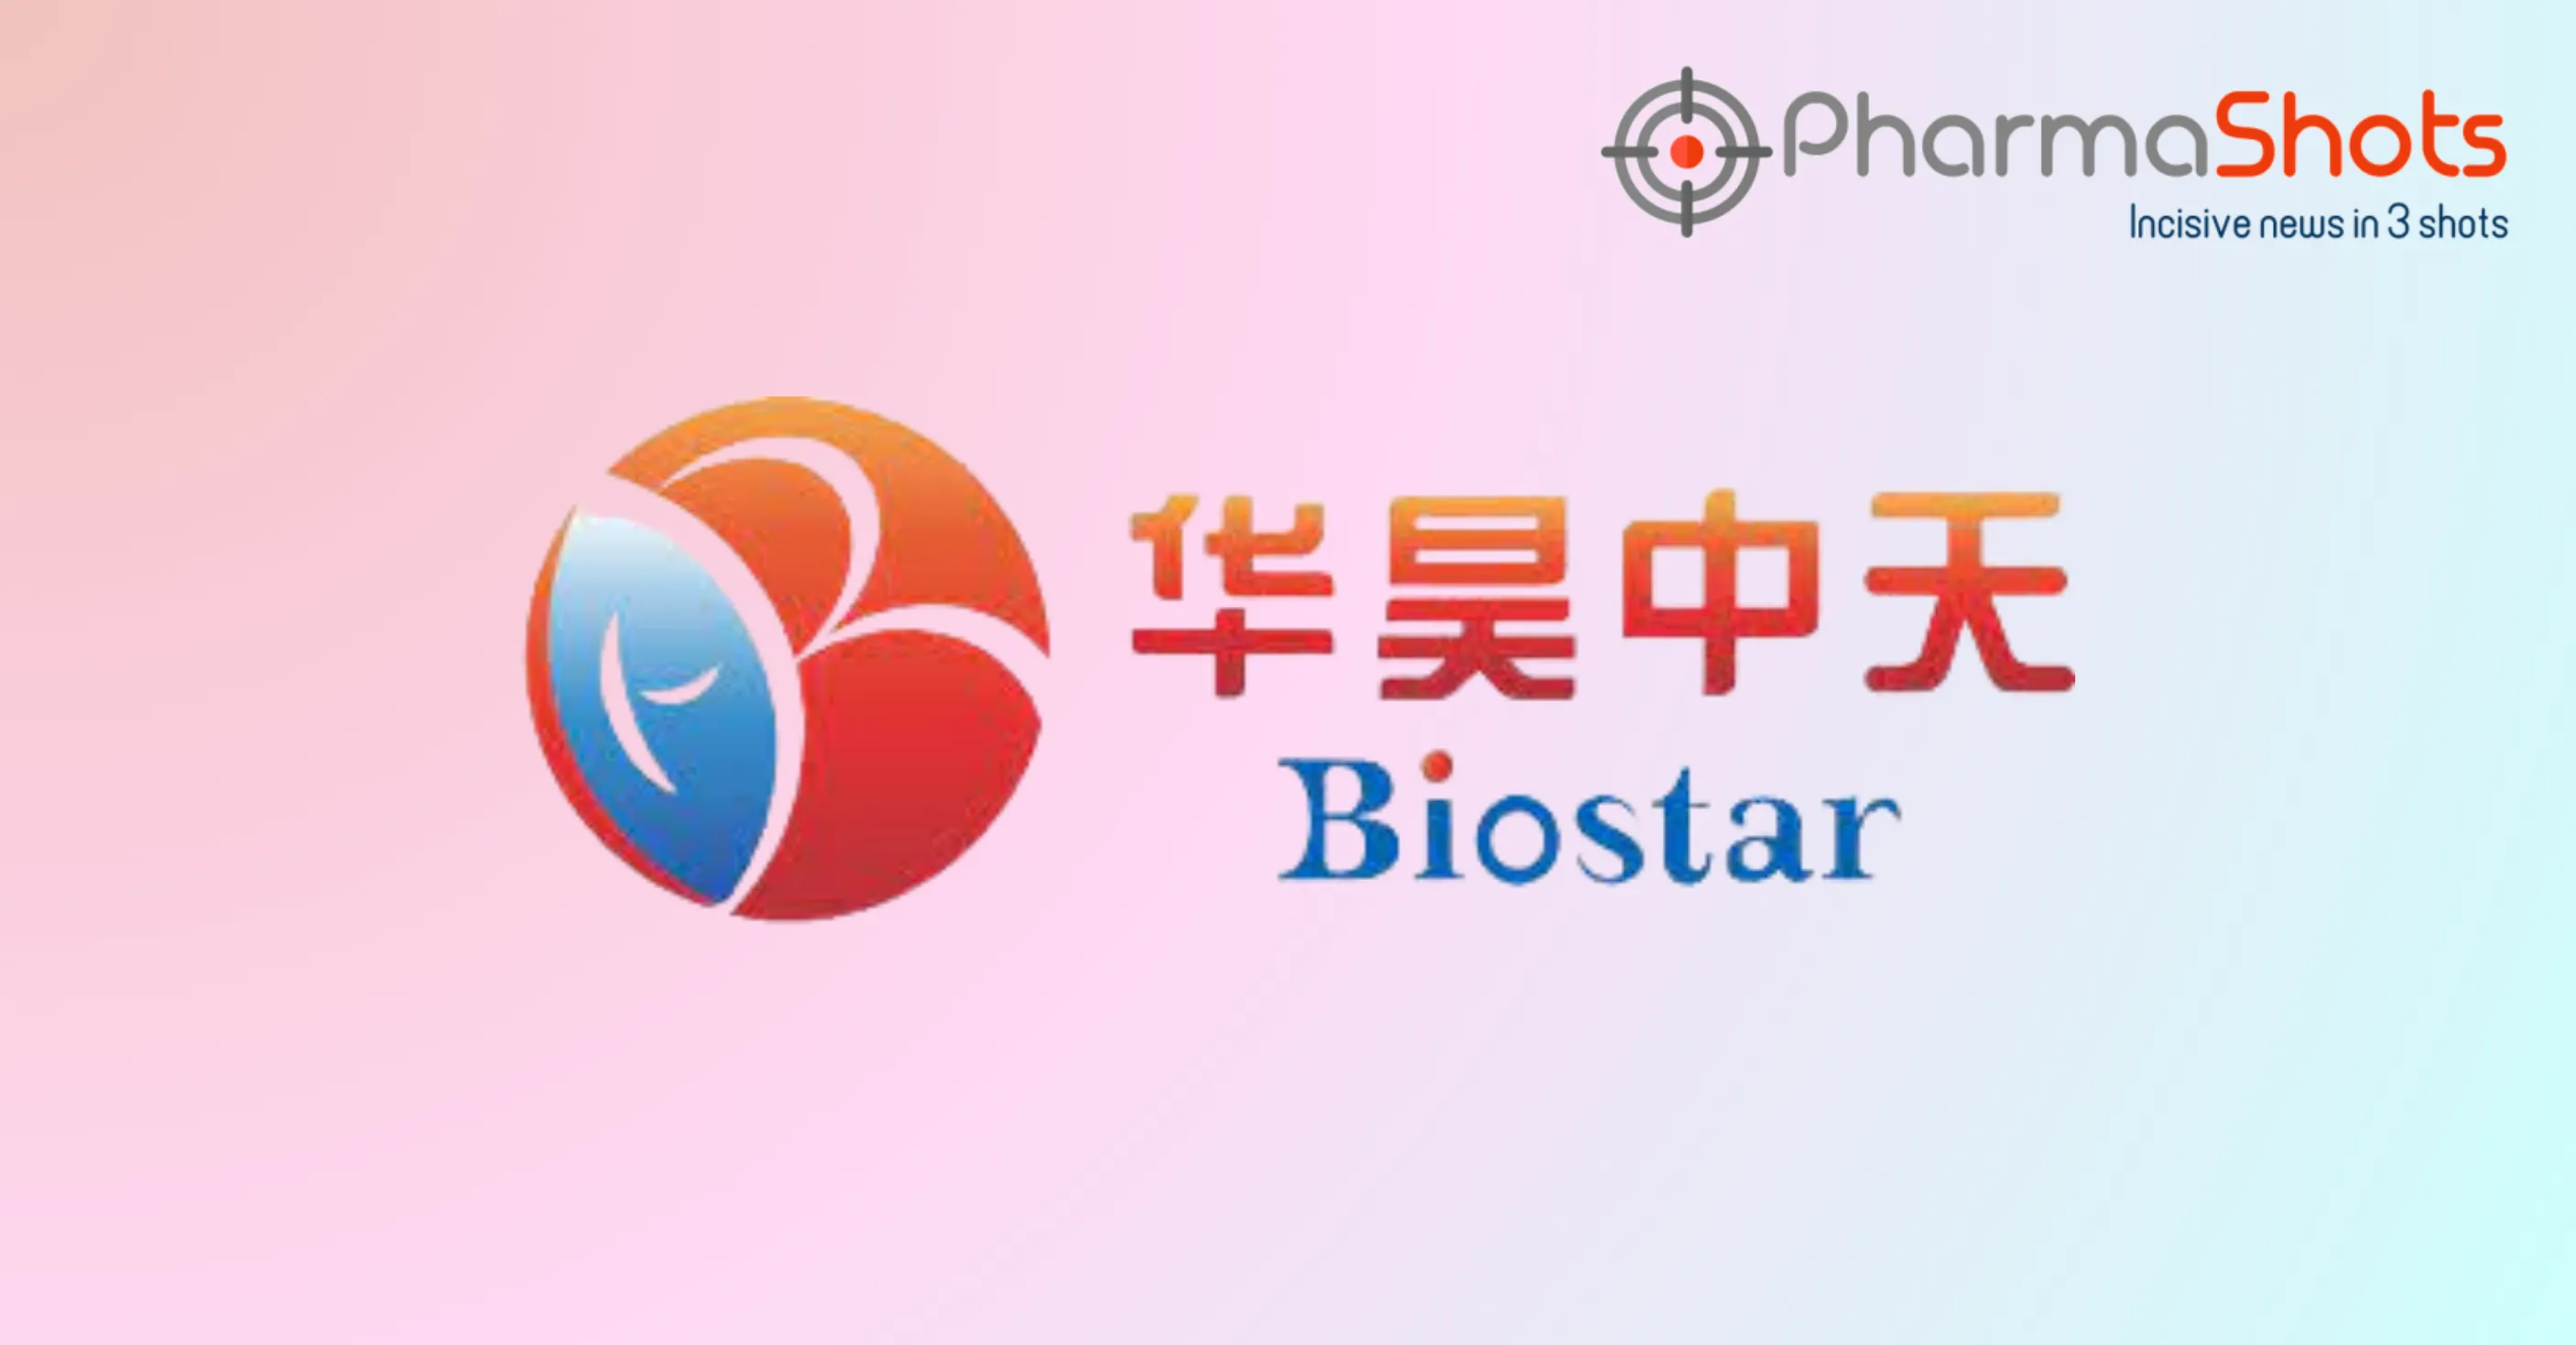 Biostar Pharma Reports the US FDA’s IND Clearance for P-II Trial of Utidelone to Treat Breast Cancer Brain Metastasis